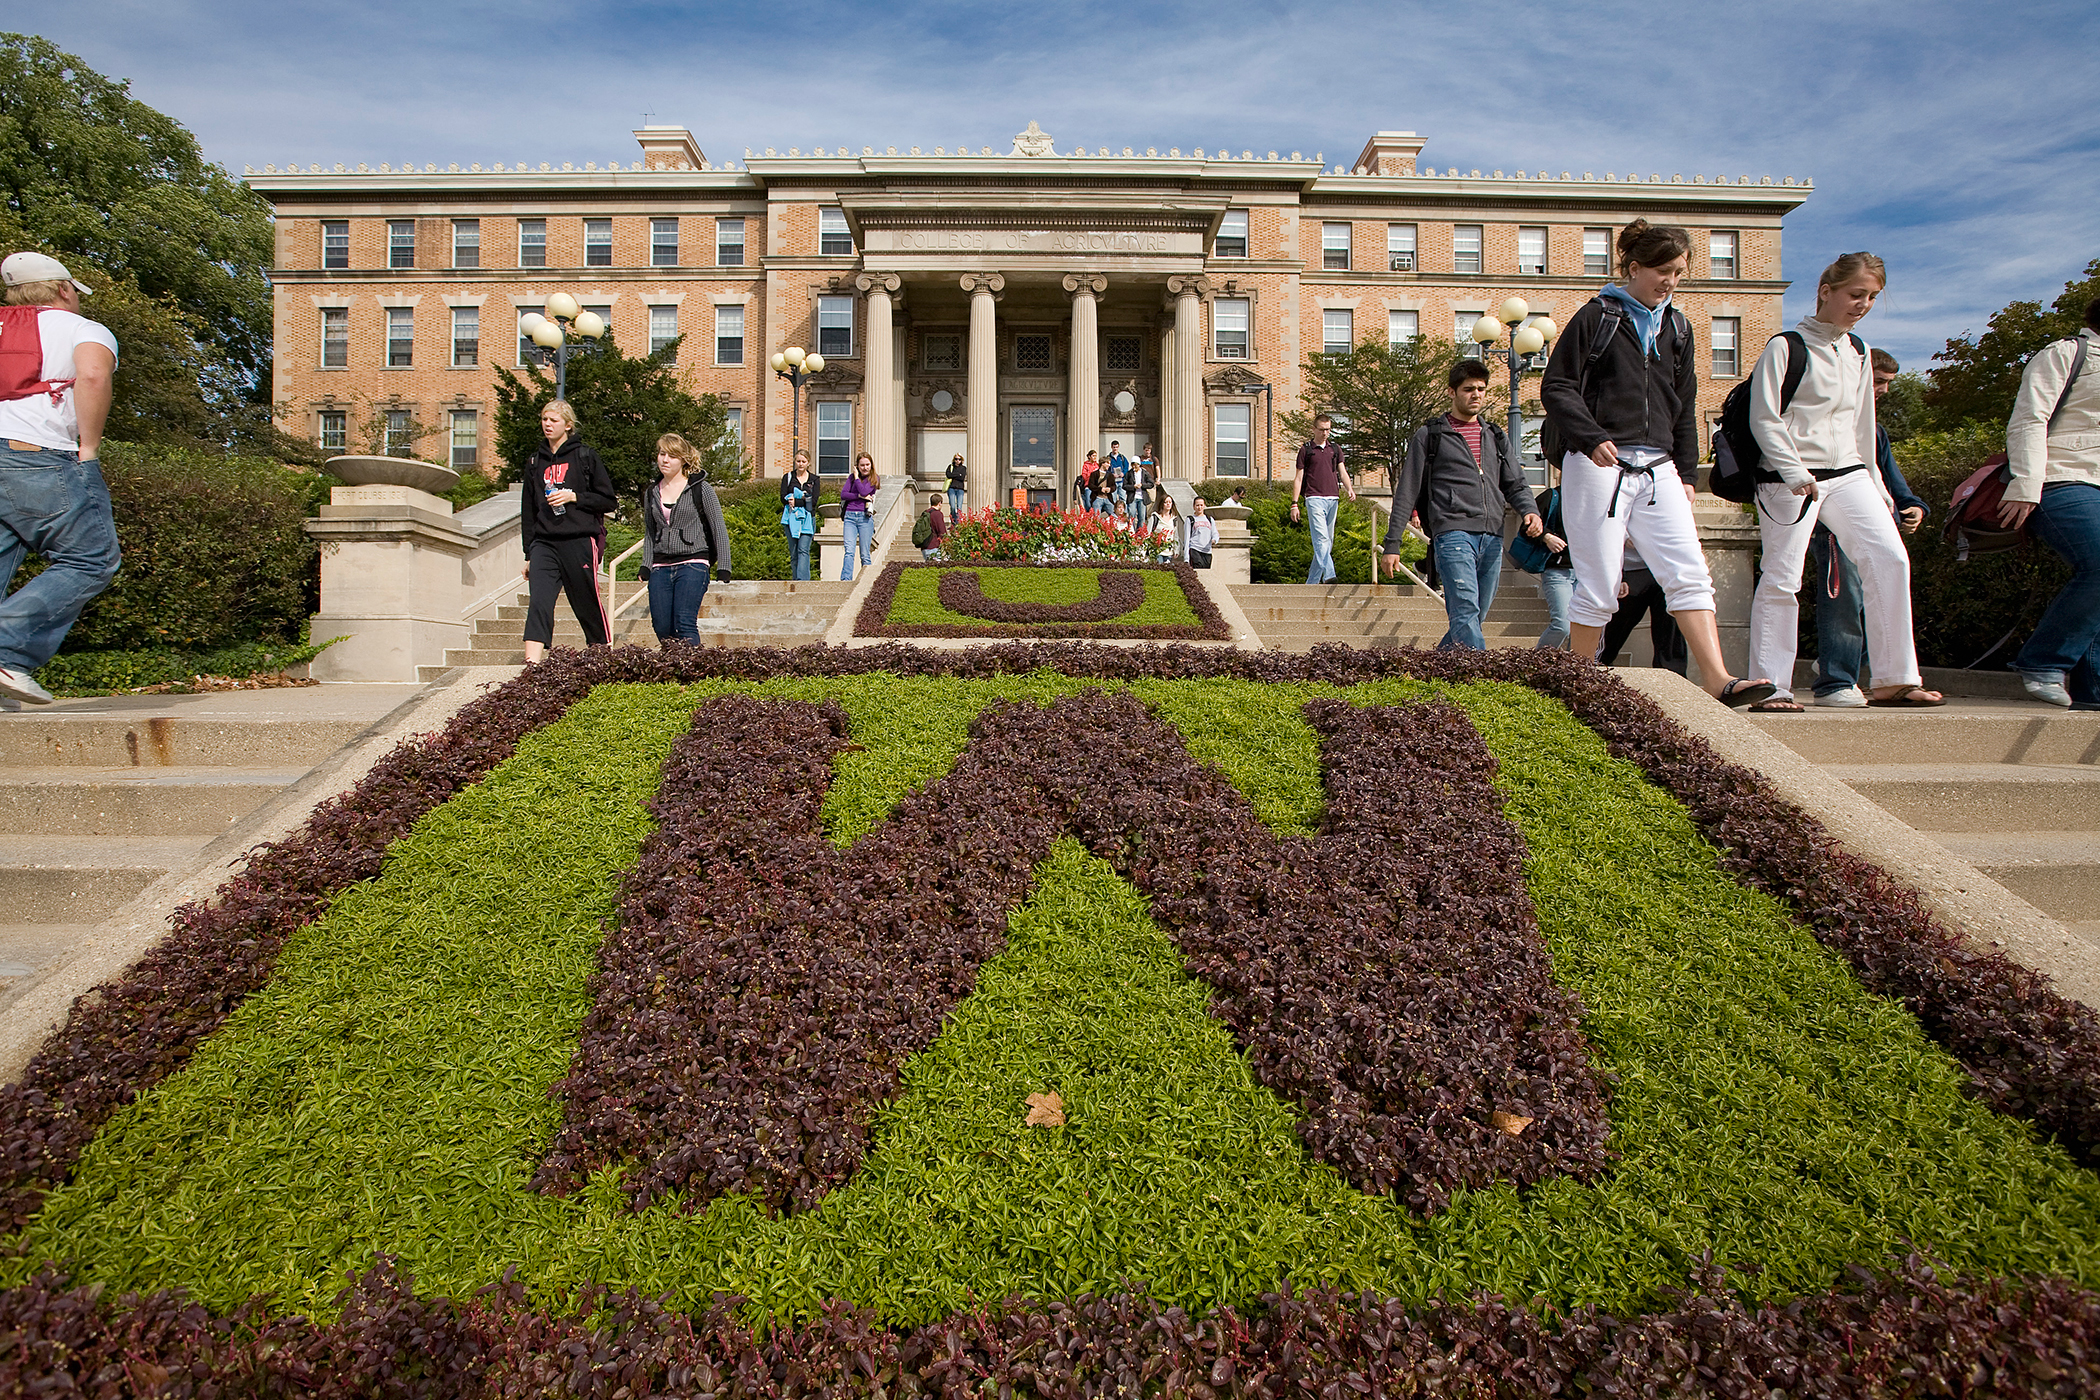 10 Best Public Colleges for Out-of-Staters